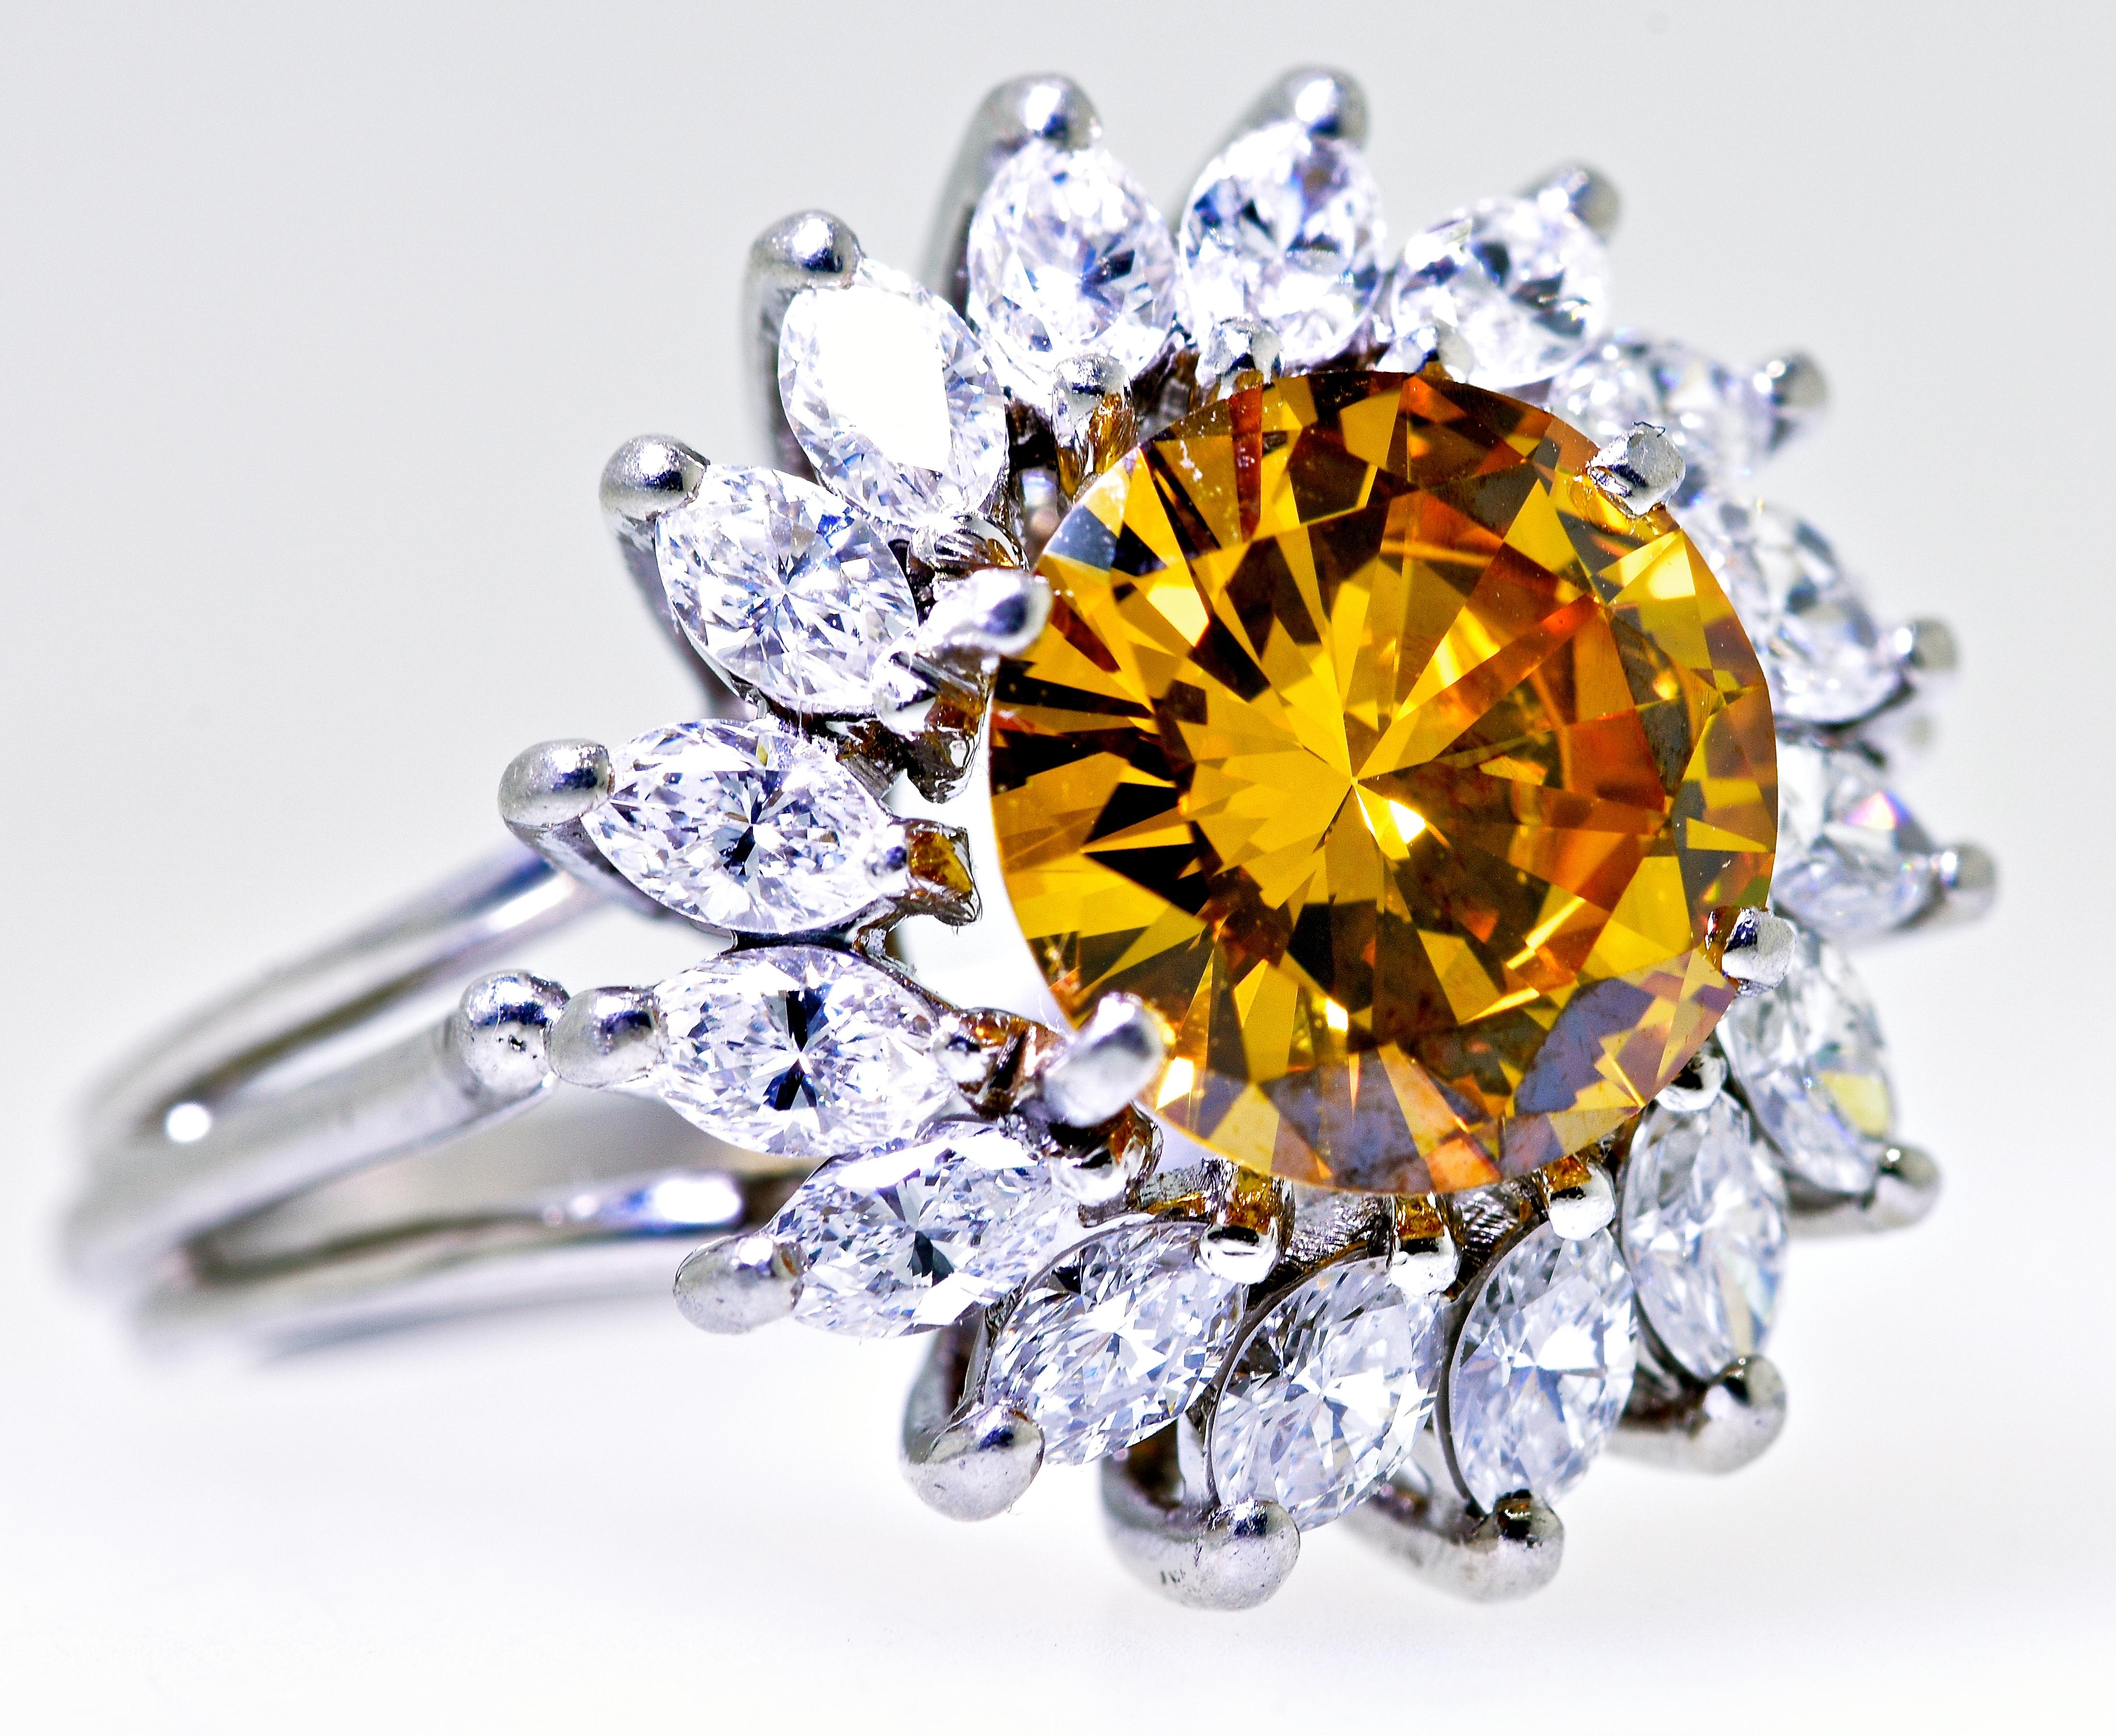 Diamond of a brilliant cognac (deep golden) color weighing 2.68 cts. This natural, well cut, diamond has been examined by the G.I.A. (Report No. 2430550), and has a genuine lab created cognac color.  The white marquis cut diamonds surrounding this